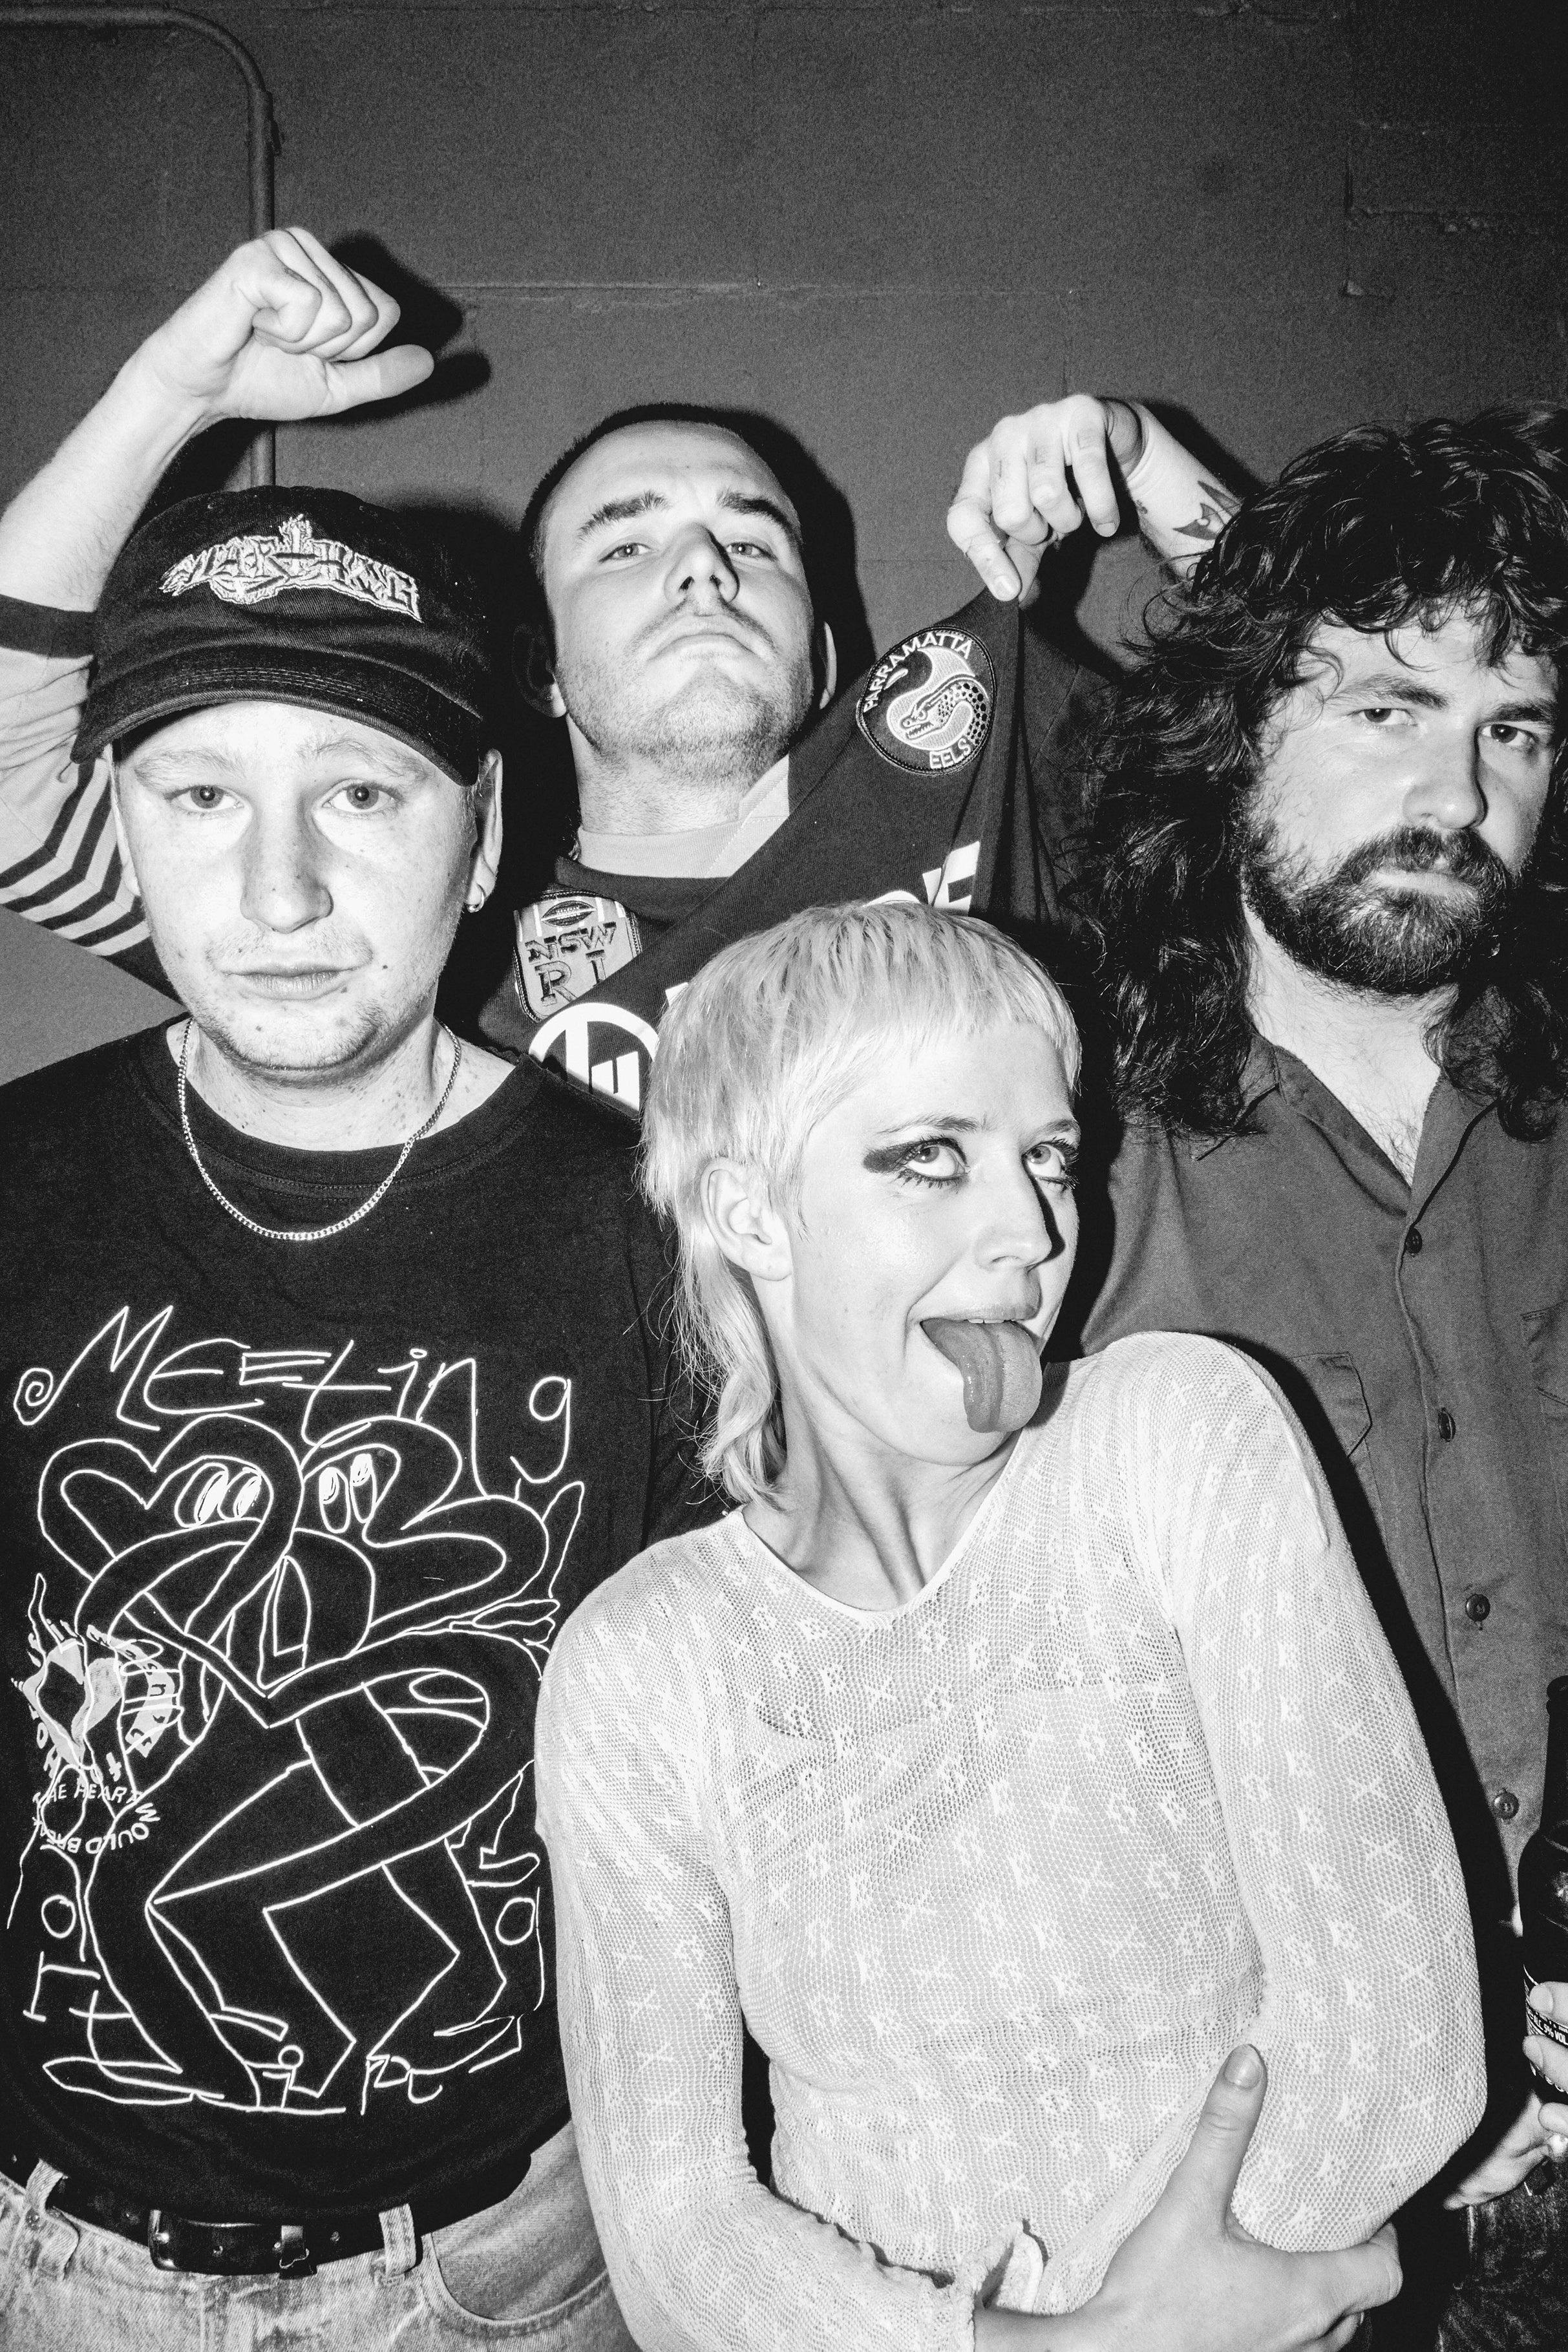 Amyl and the Sniffers at Fox Theater - Oakland